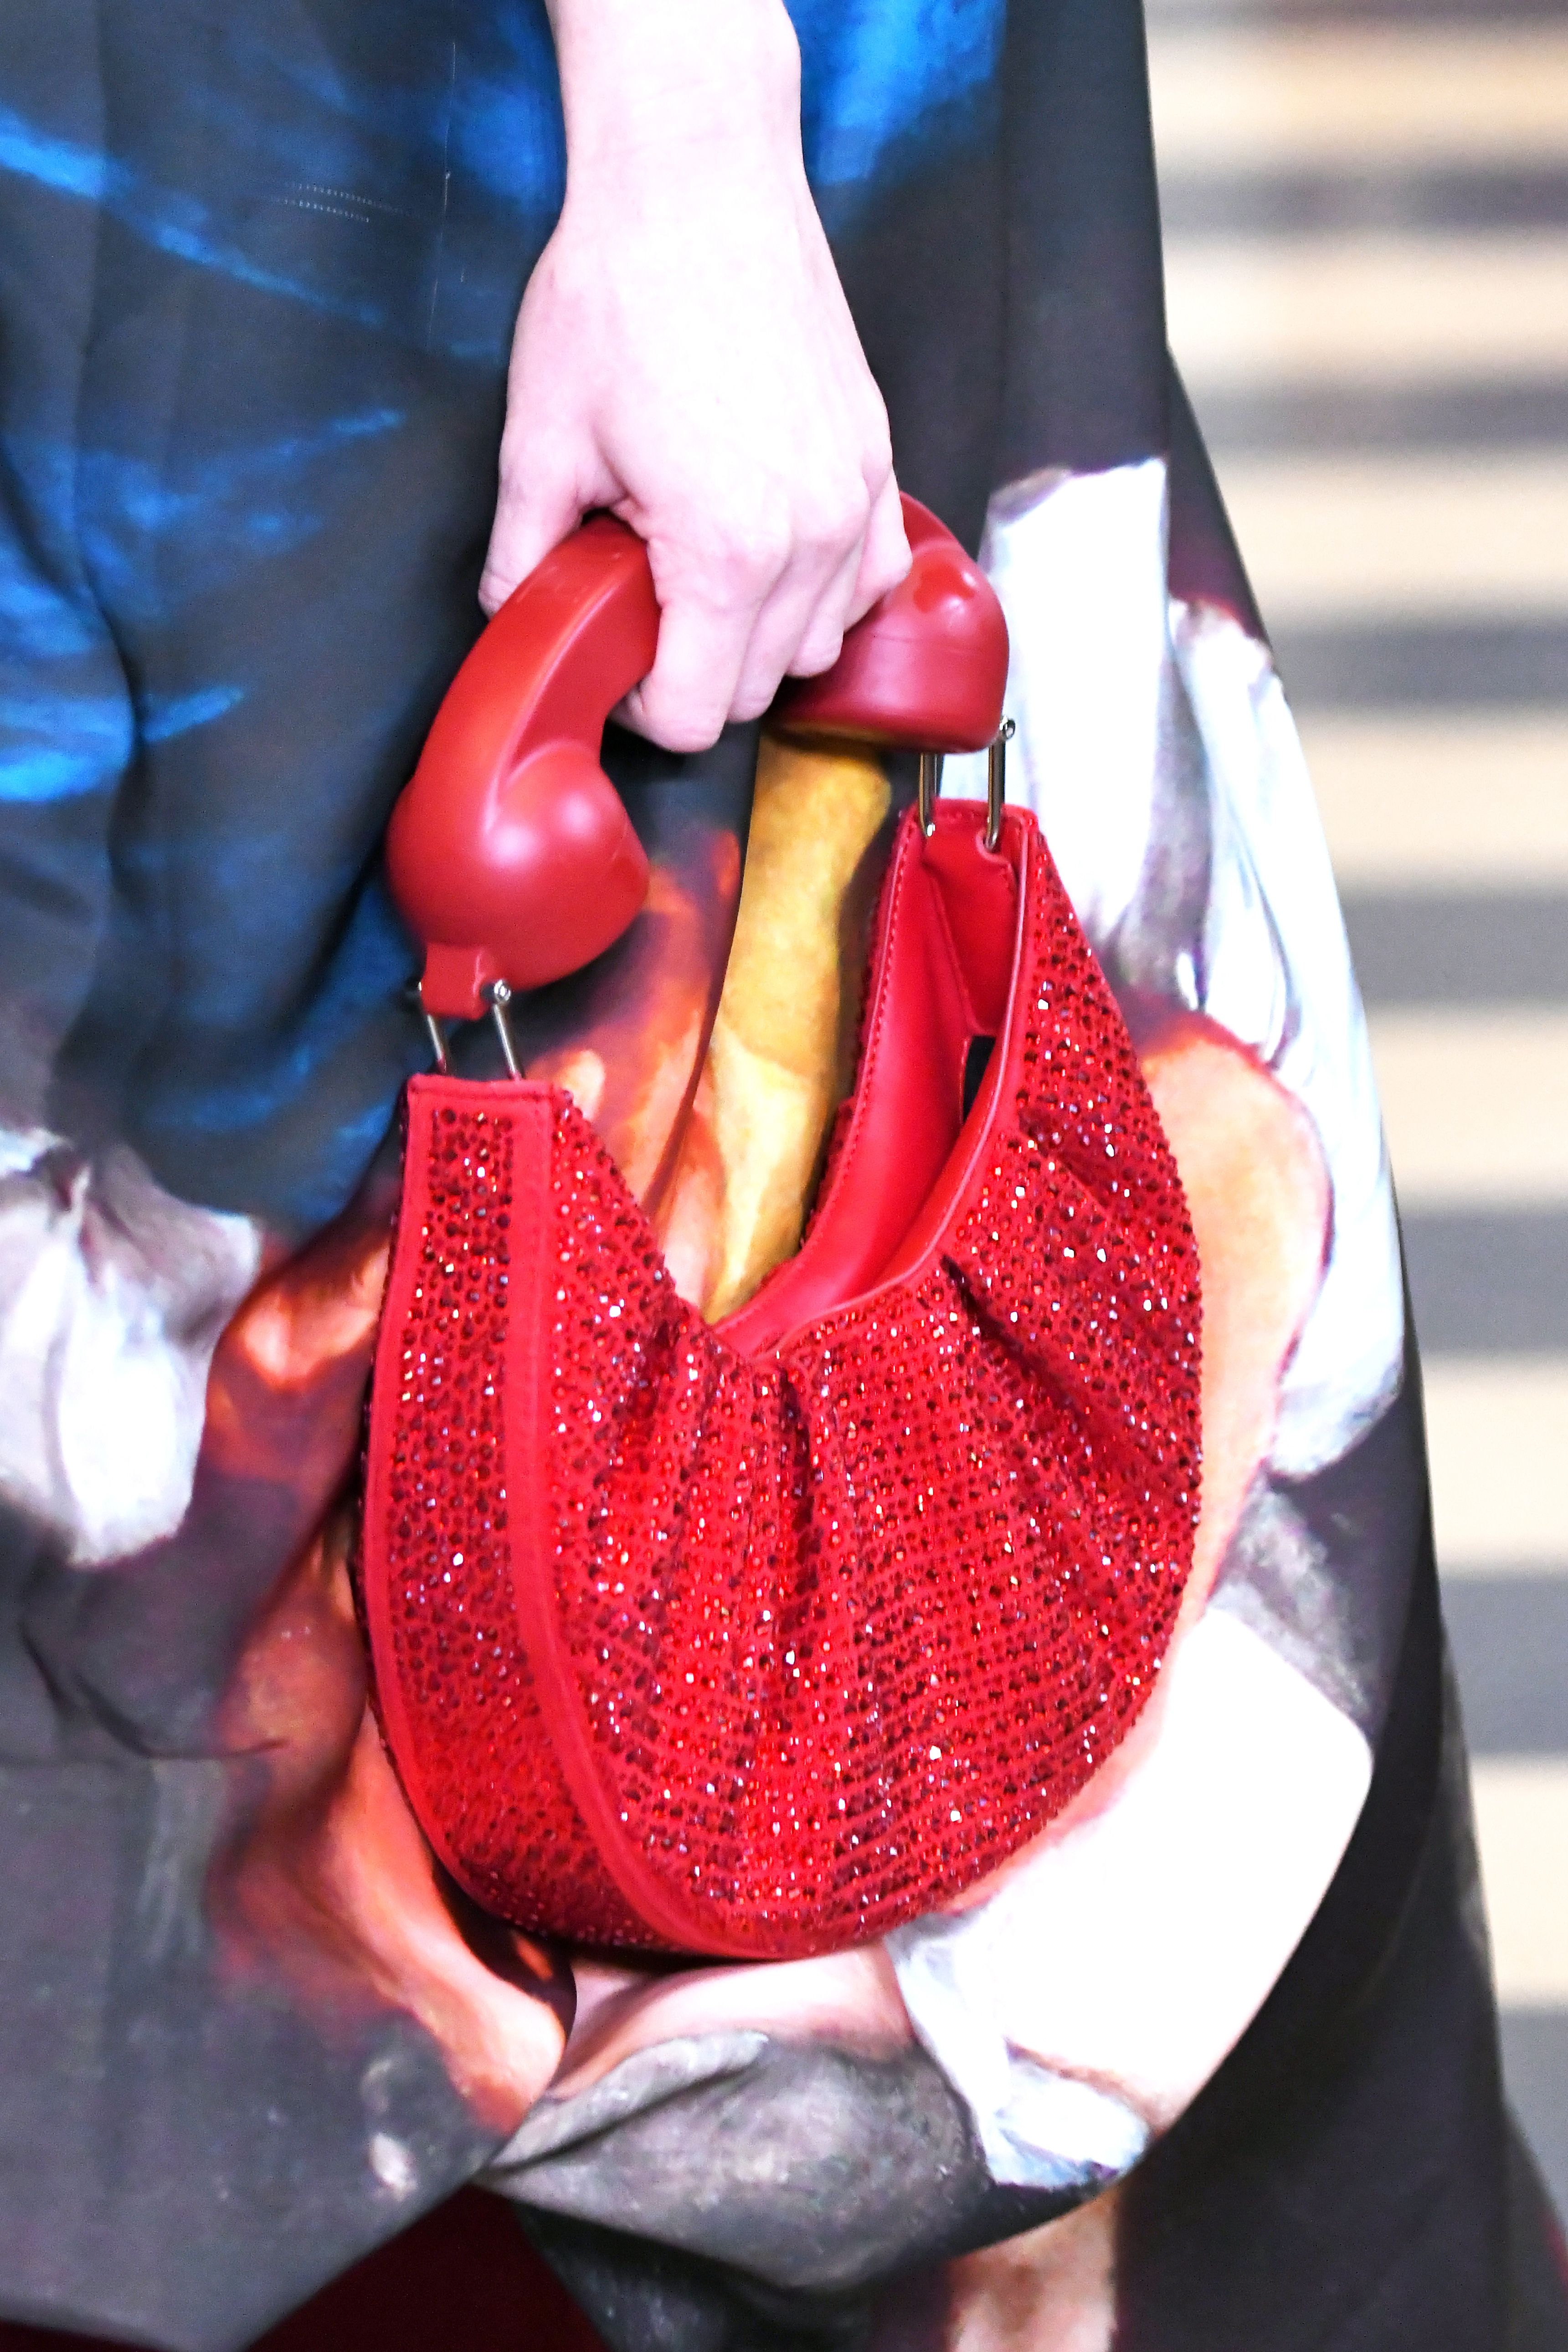 The hottest handbags for fall